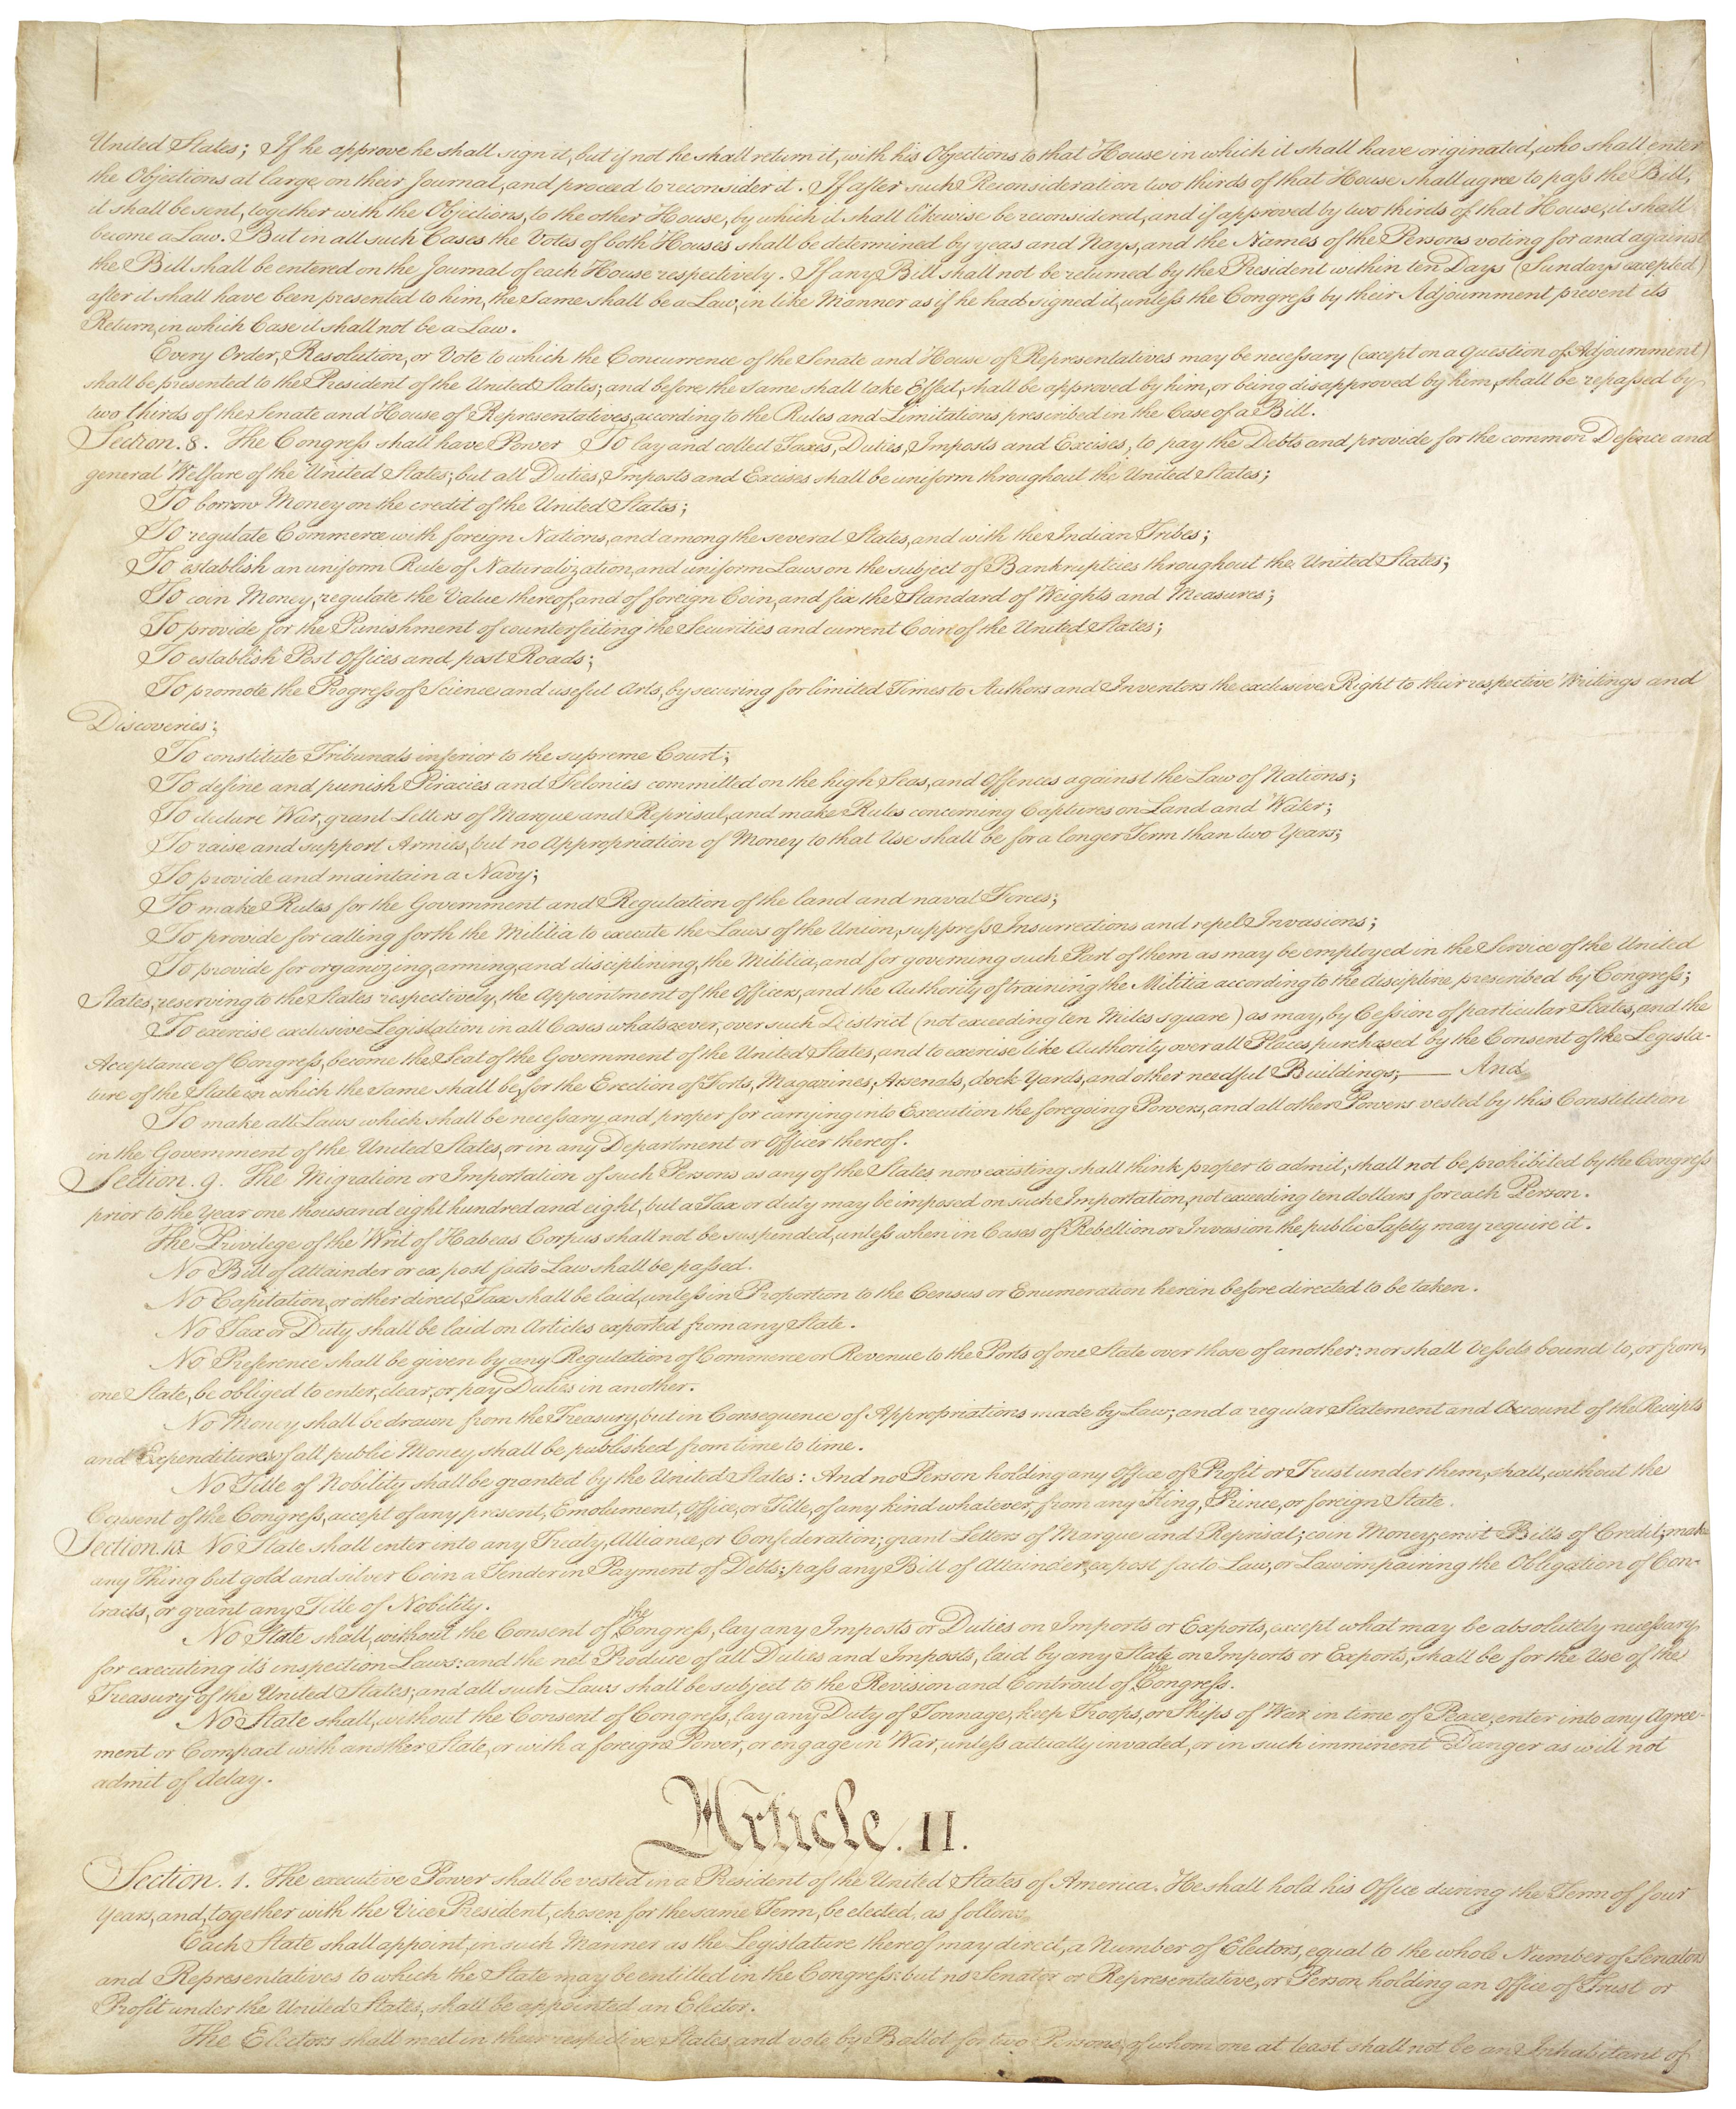 America's Founding Documents High Resolution Downloads